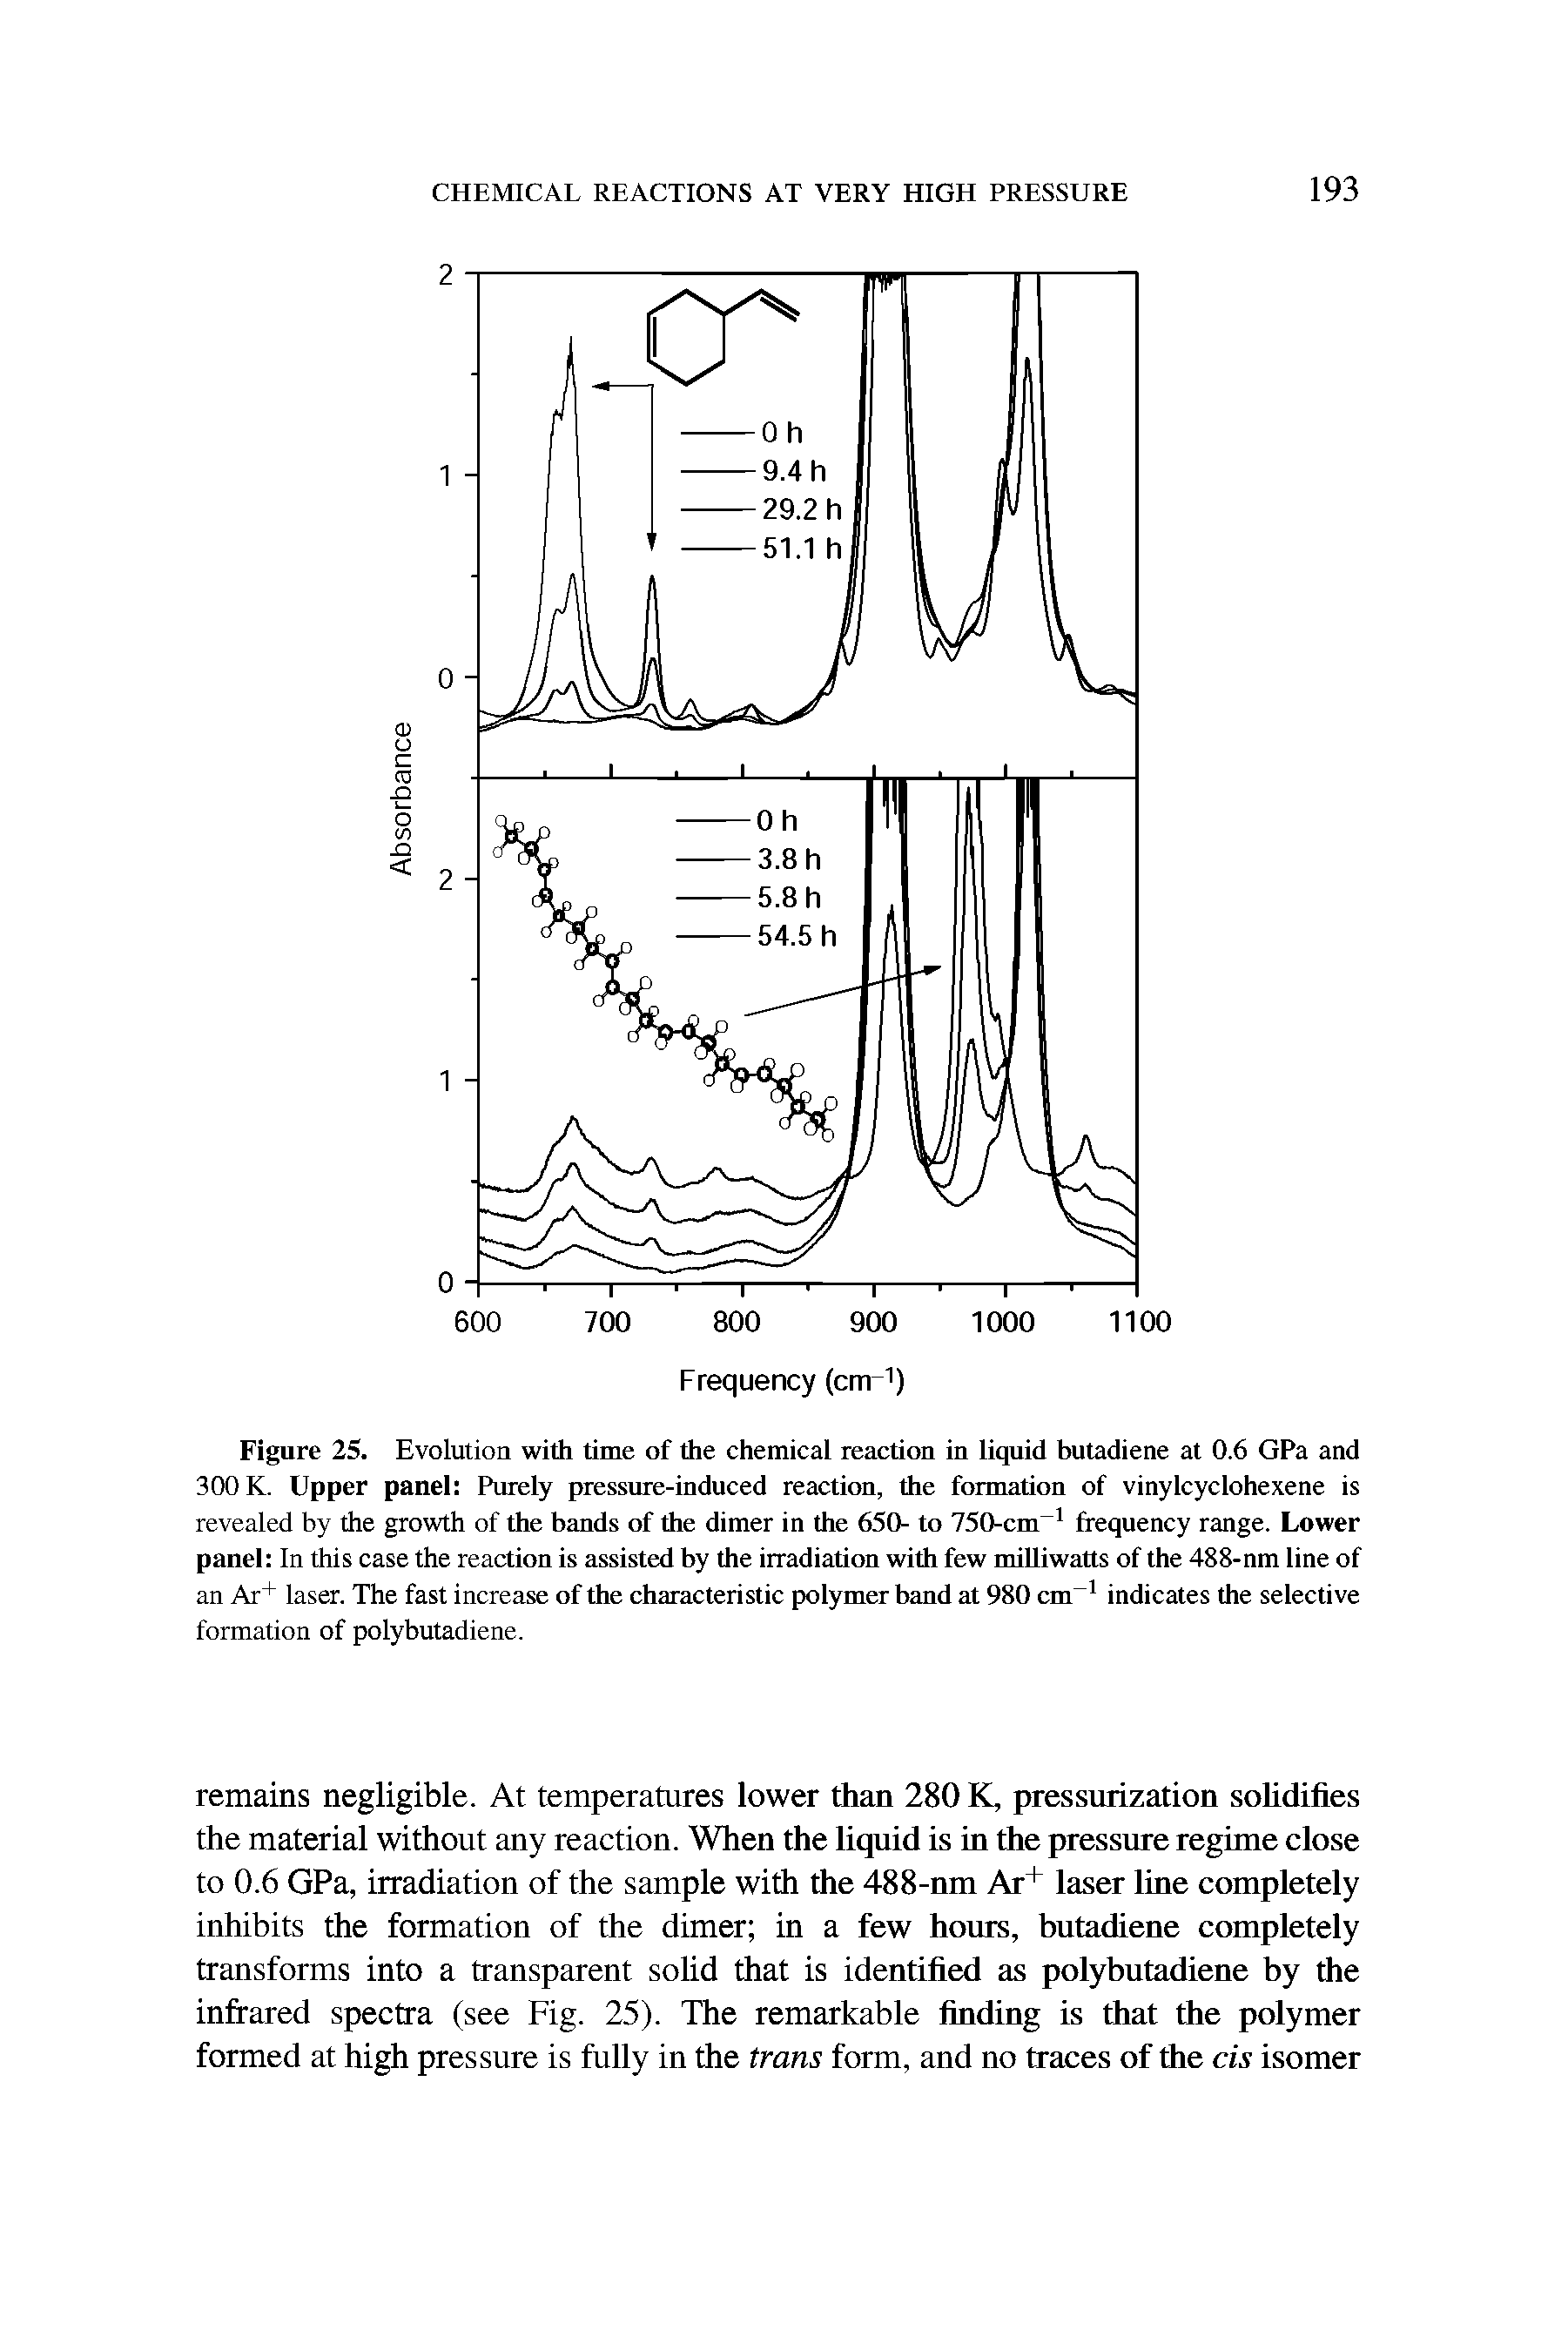 Figure 25. Evolution with time of the chemical reaction in liquid butadiene at 0.6 GPa and 300 K. Upper panel Purely pressure-induced reaction, the formation of vinylcyclohexene is revealed by the growth of the bands of the dimer in the 650- to 750-cm frequency range. Lower panel In this case the reaction is assisted by the irradiation with few milliwatts of the 488-nm line of an Ar+ laser. The fast increase of the characteristic polymer band at 980 cm indicates the selective formation of polybutadiene.